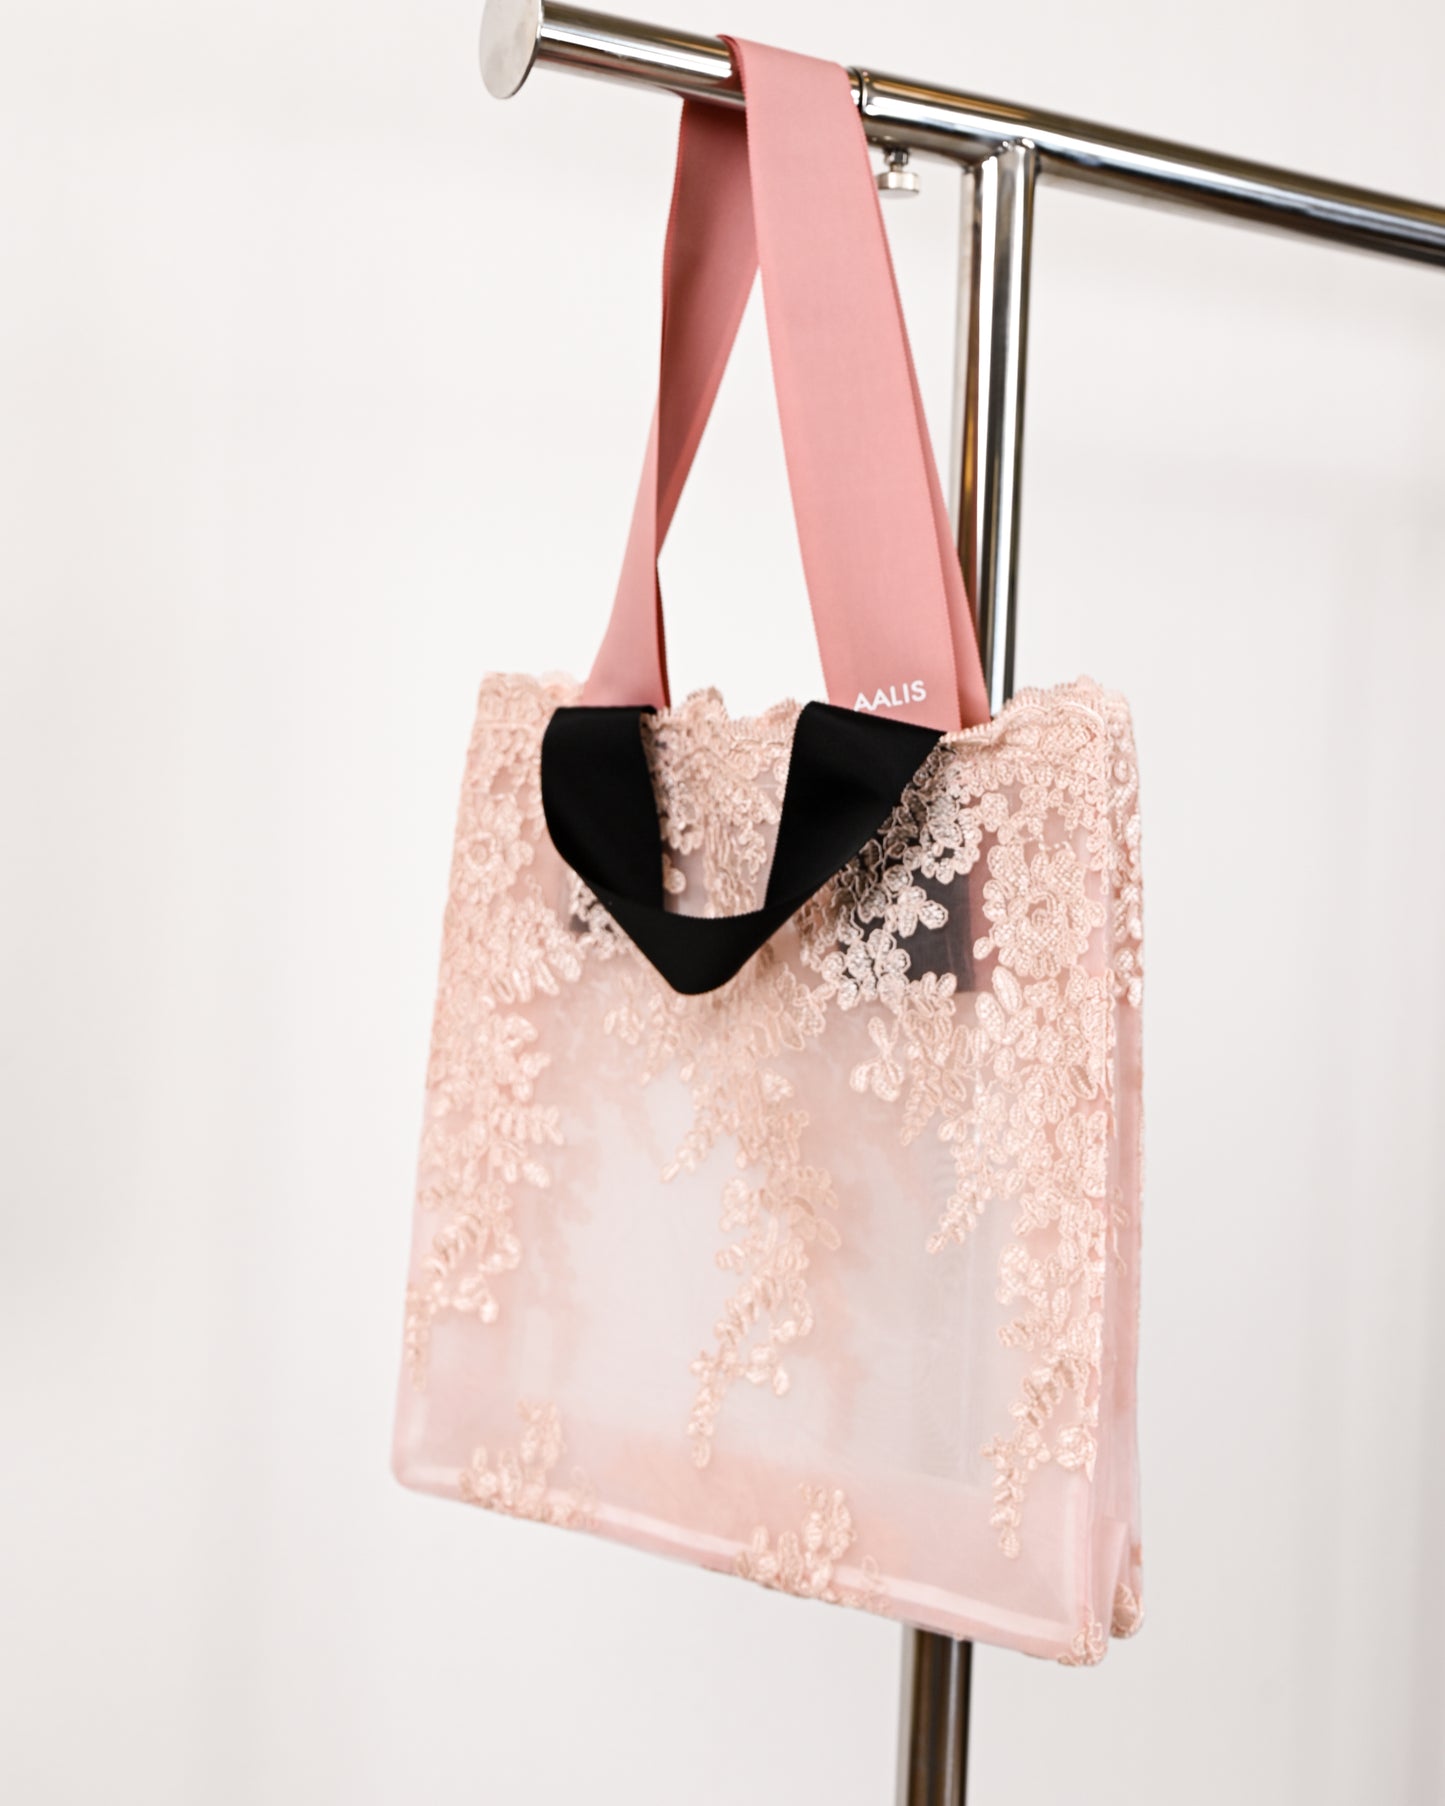 Load image into Gallery viewer, aalis Classic vertical lace tote bag (Pink)
